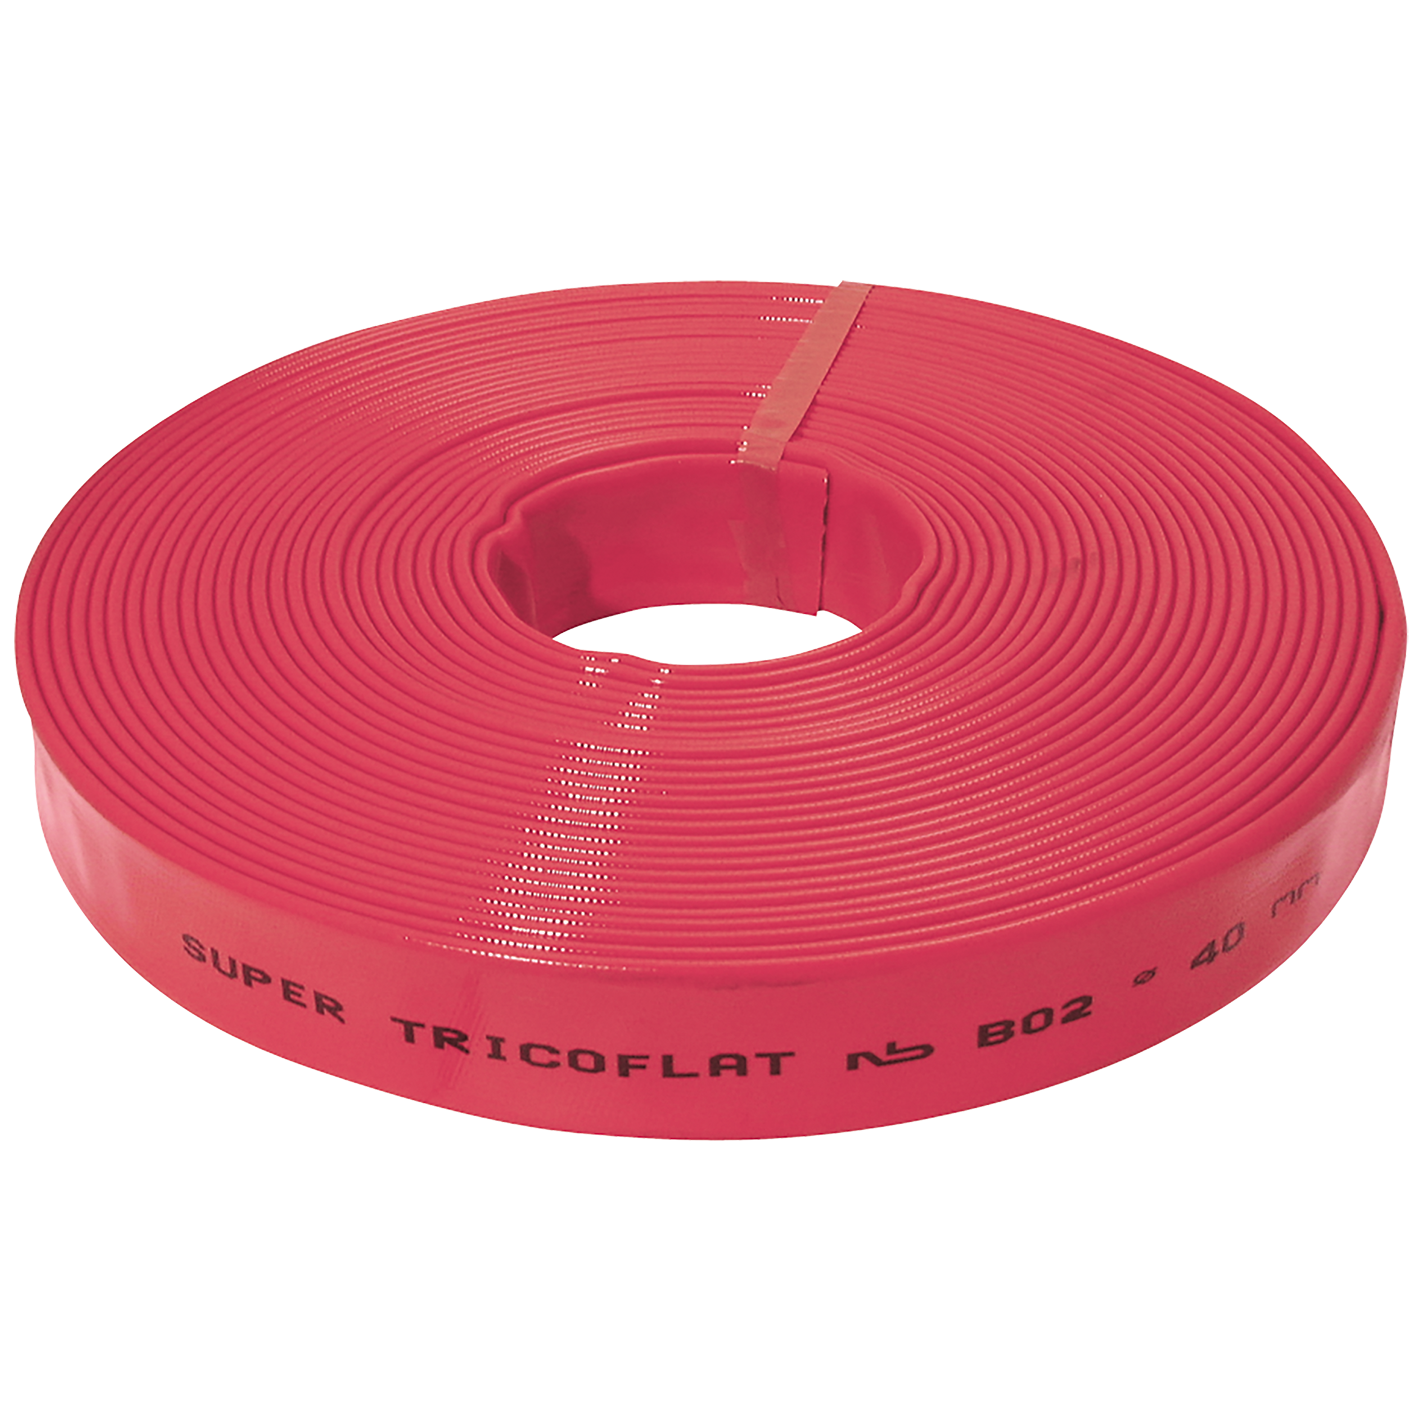 76MM ID RED SUPERTRICOFLAT PVC 25M COIL